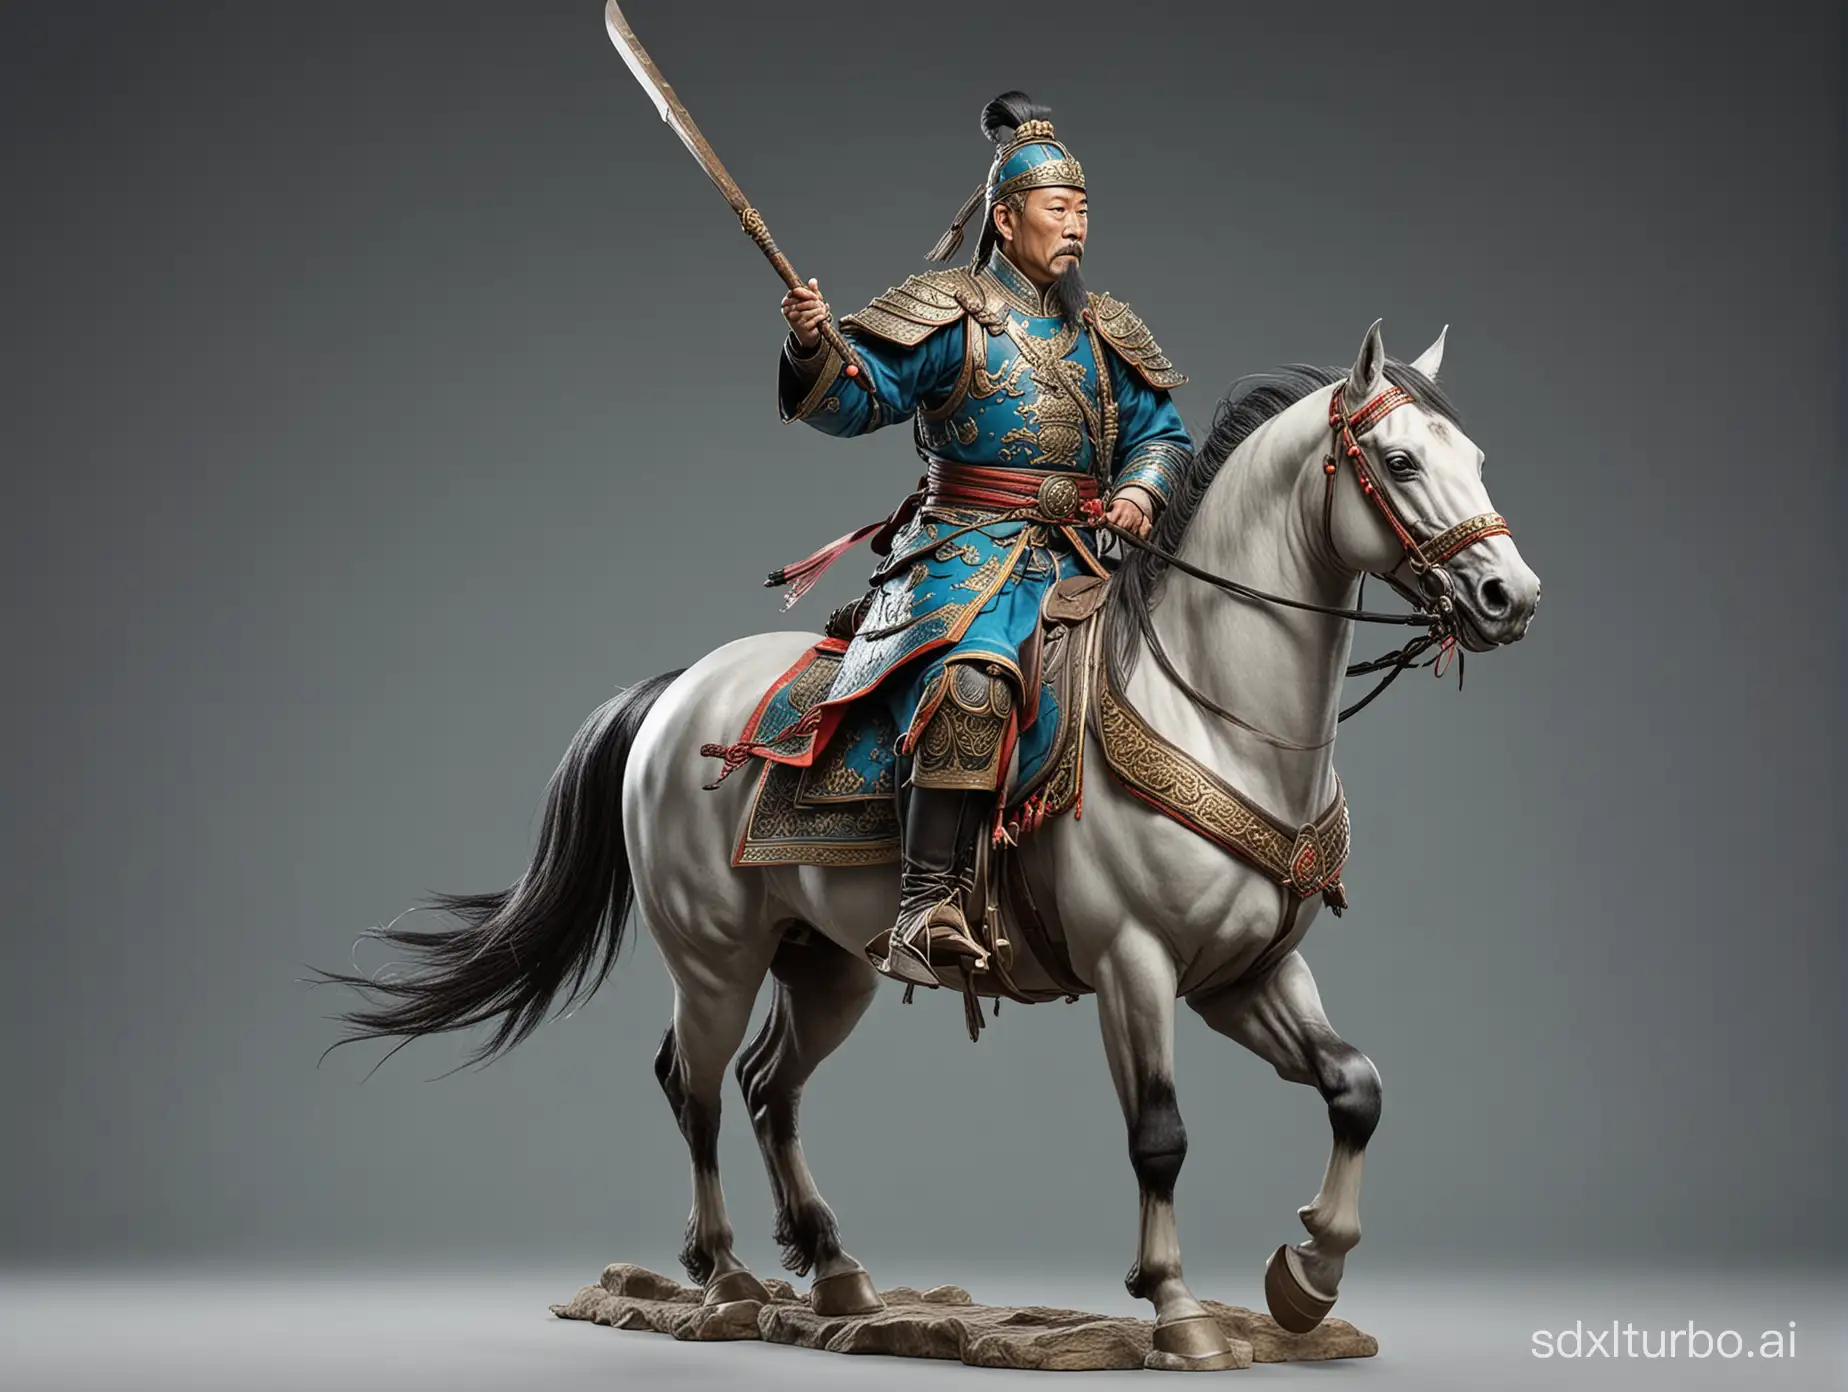 A Chinese ancient general from the Qing Dynasty, holding a long spear, riding a horse, valiant and mighty, with a clean background.